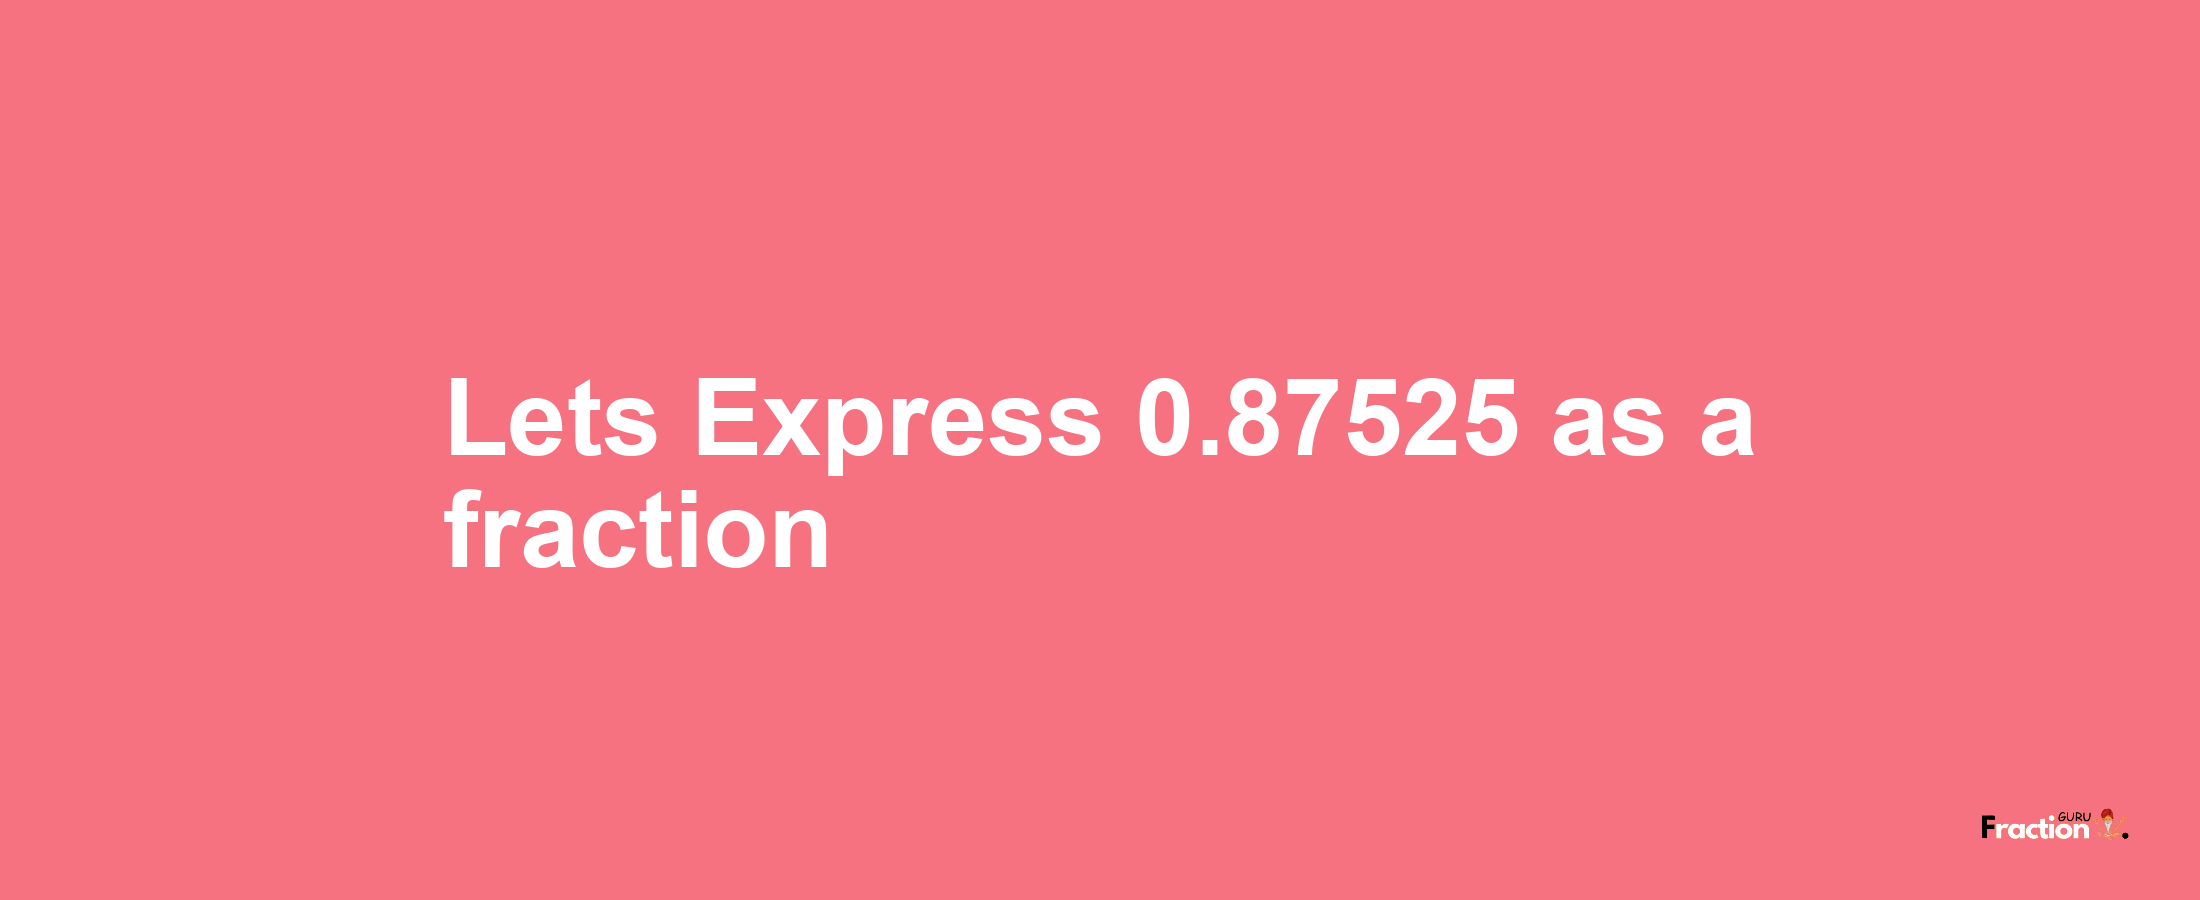 Lets Express 0.87525 as afraction